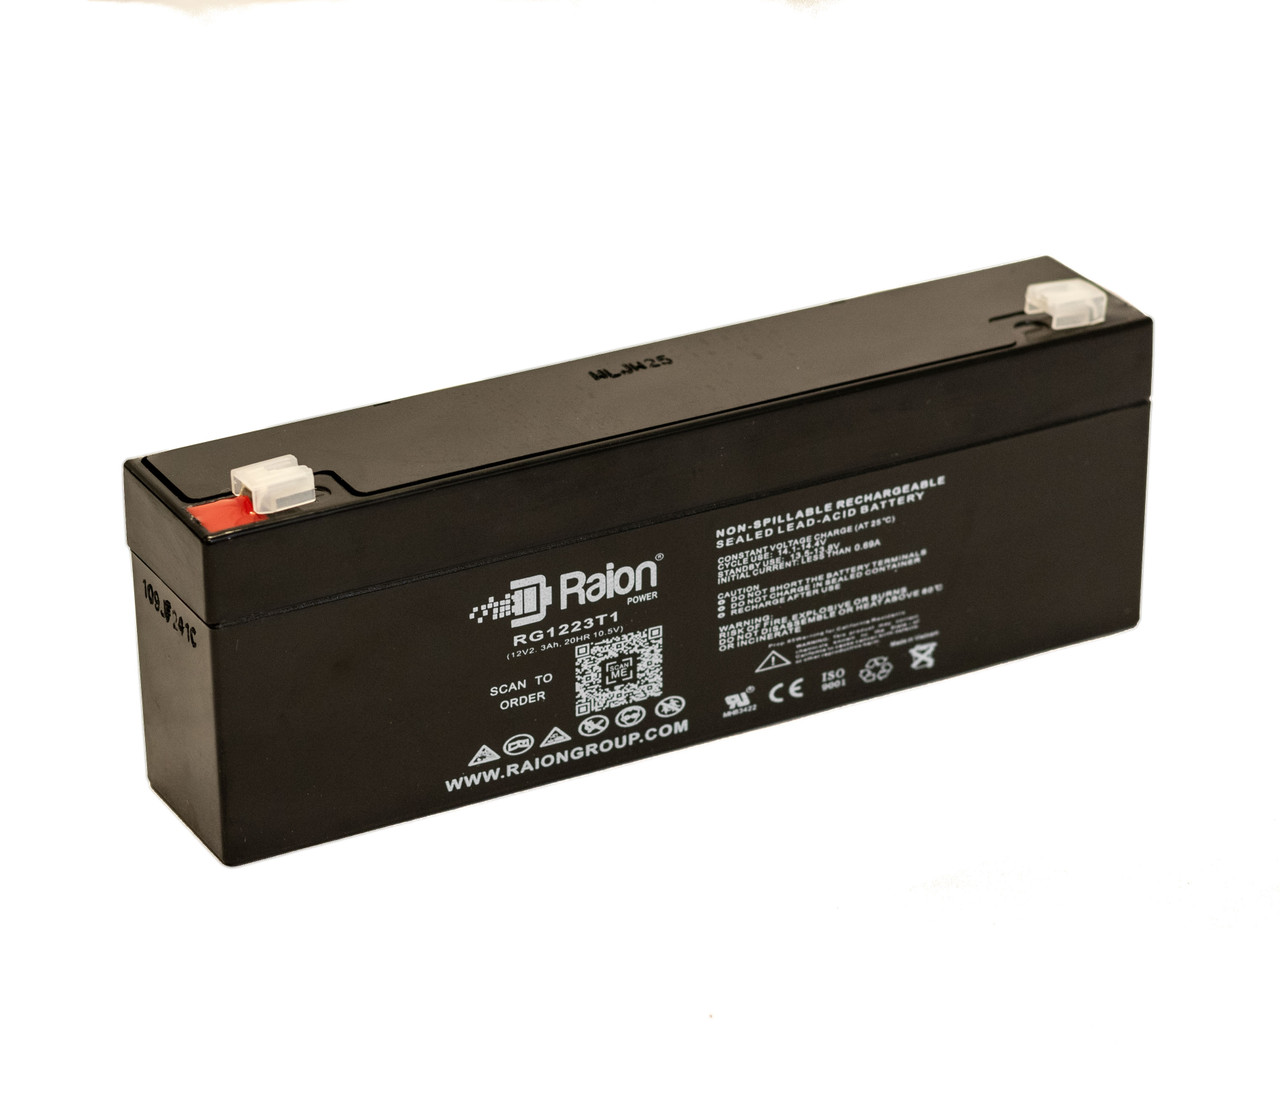 Raion Power RG1223T1 Replacement Battery for Jasco RB1223